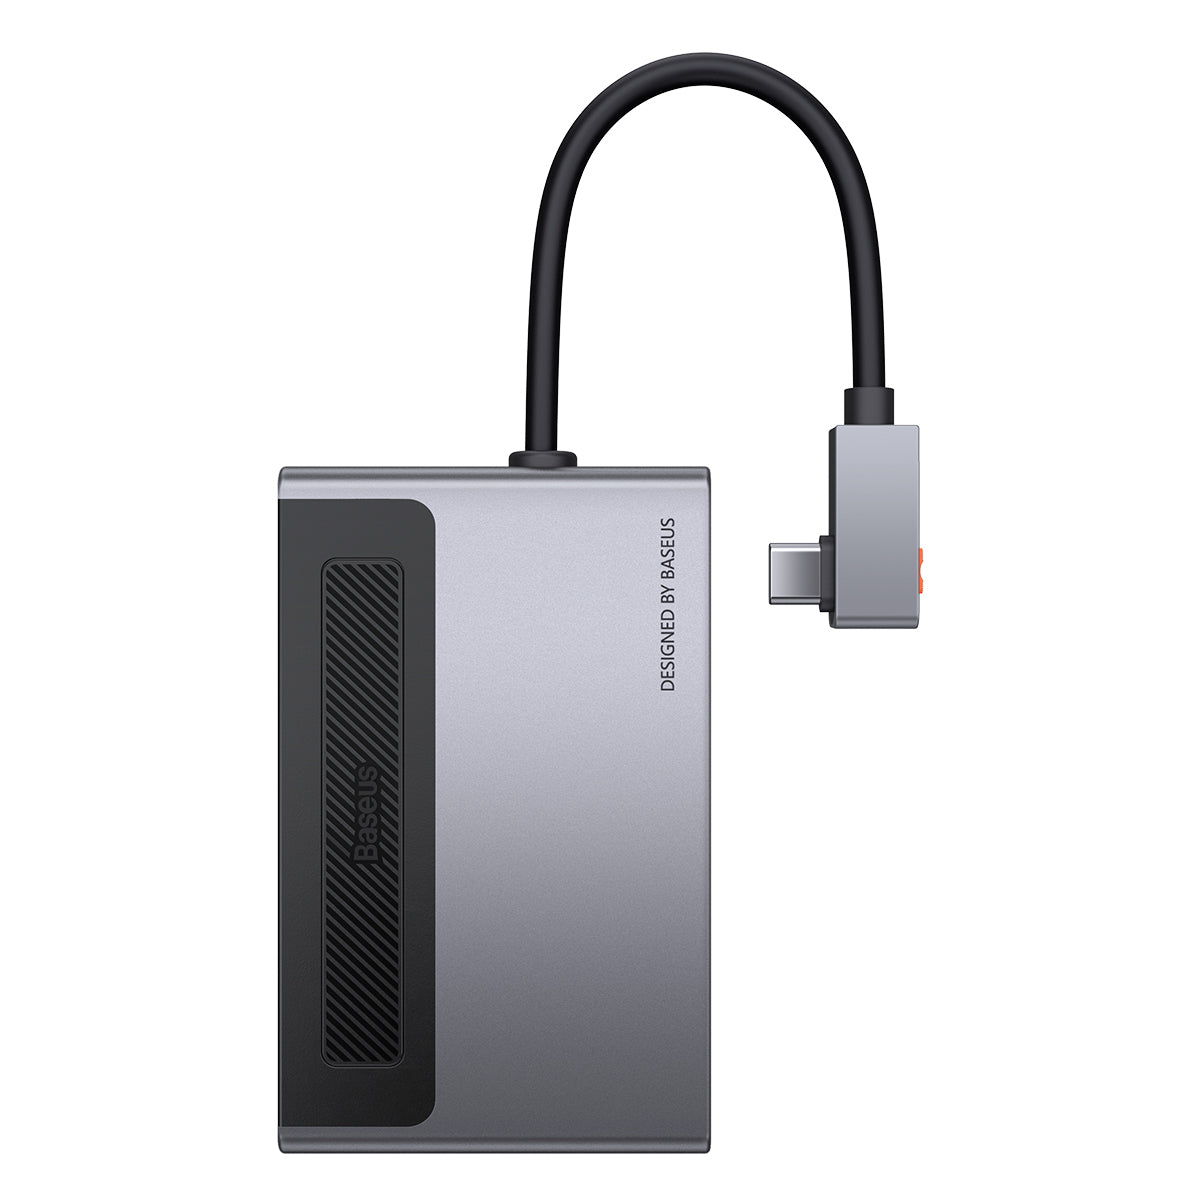 Baseus Magic Multifunctional Type-C HUB 6 Ports with a Retractable Clip Standard Edition